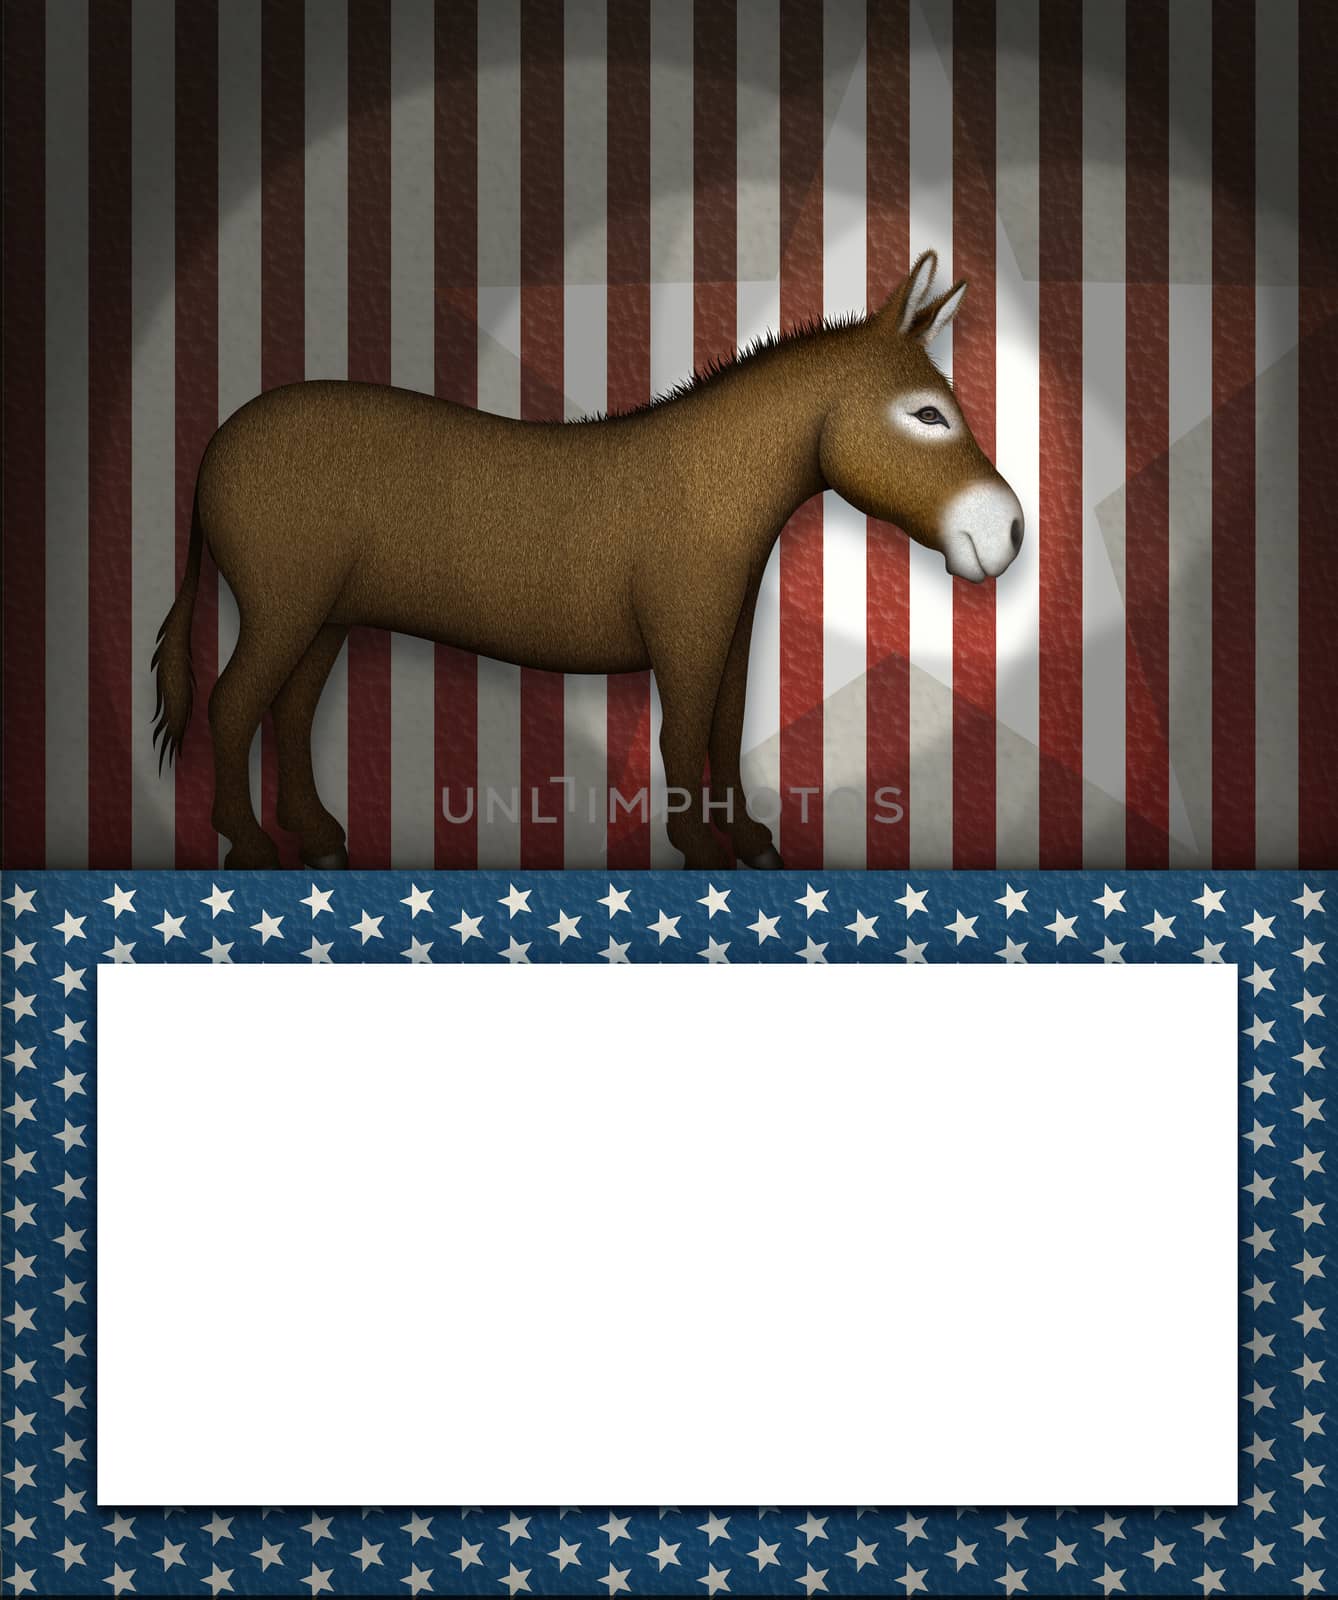 Digital illustration of a donkey as the symbol of the democrat party.